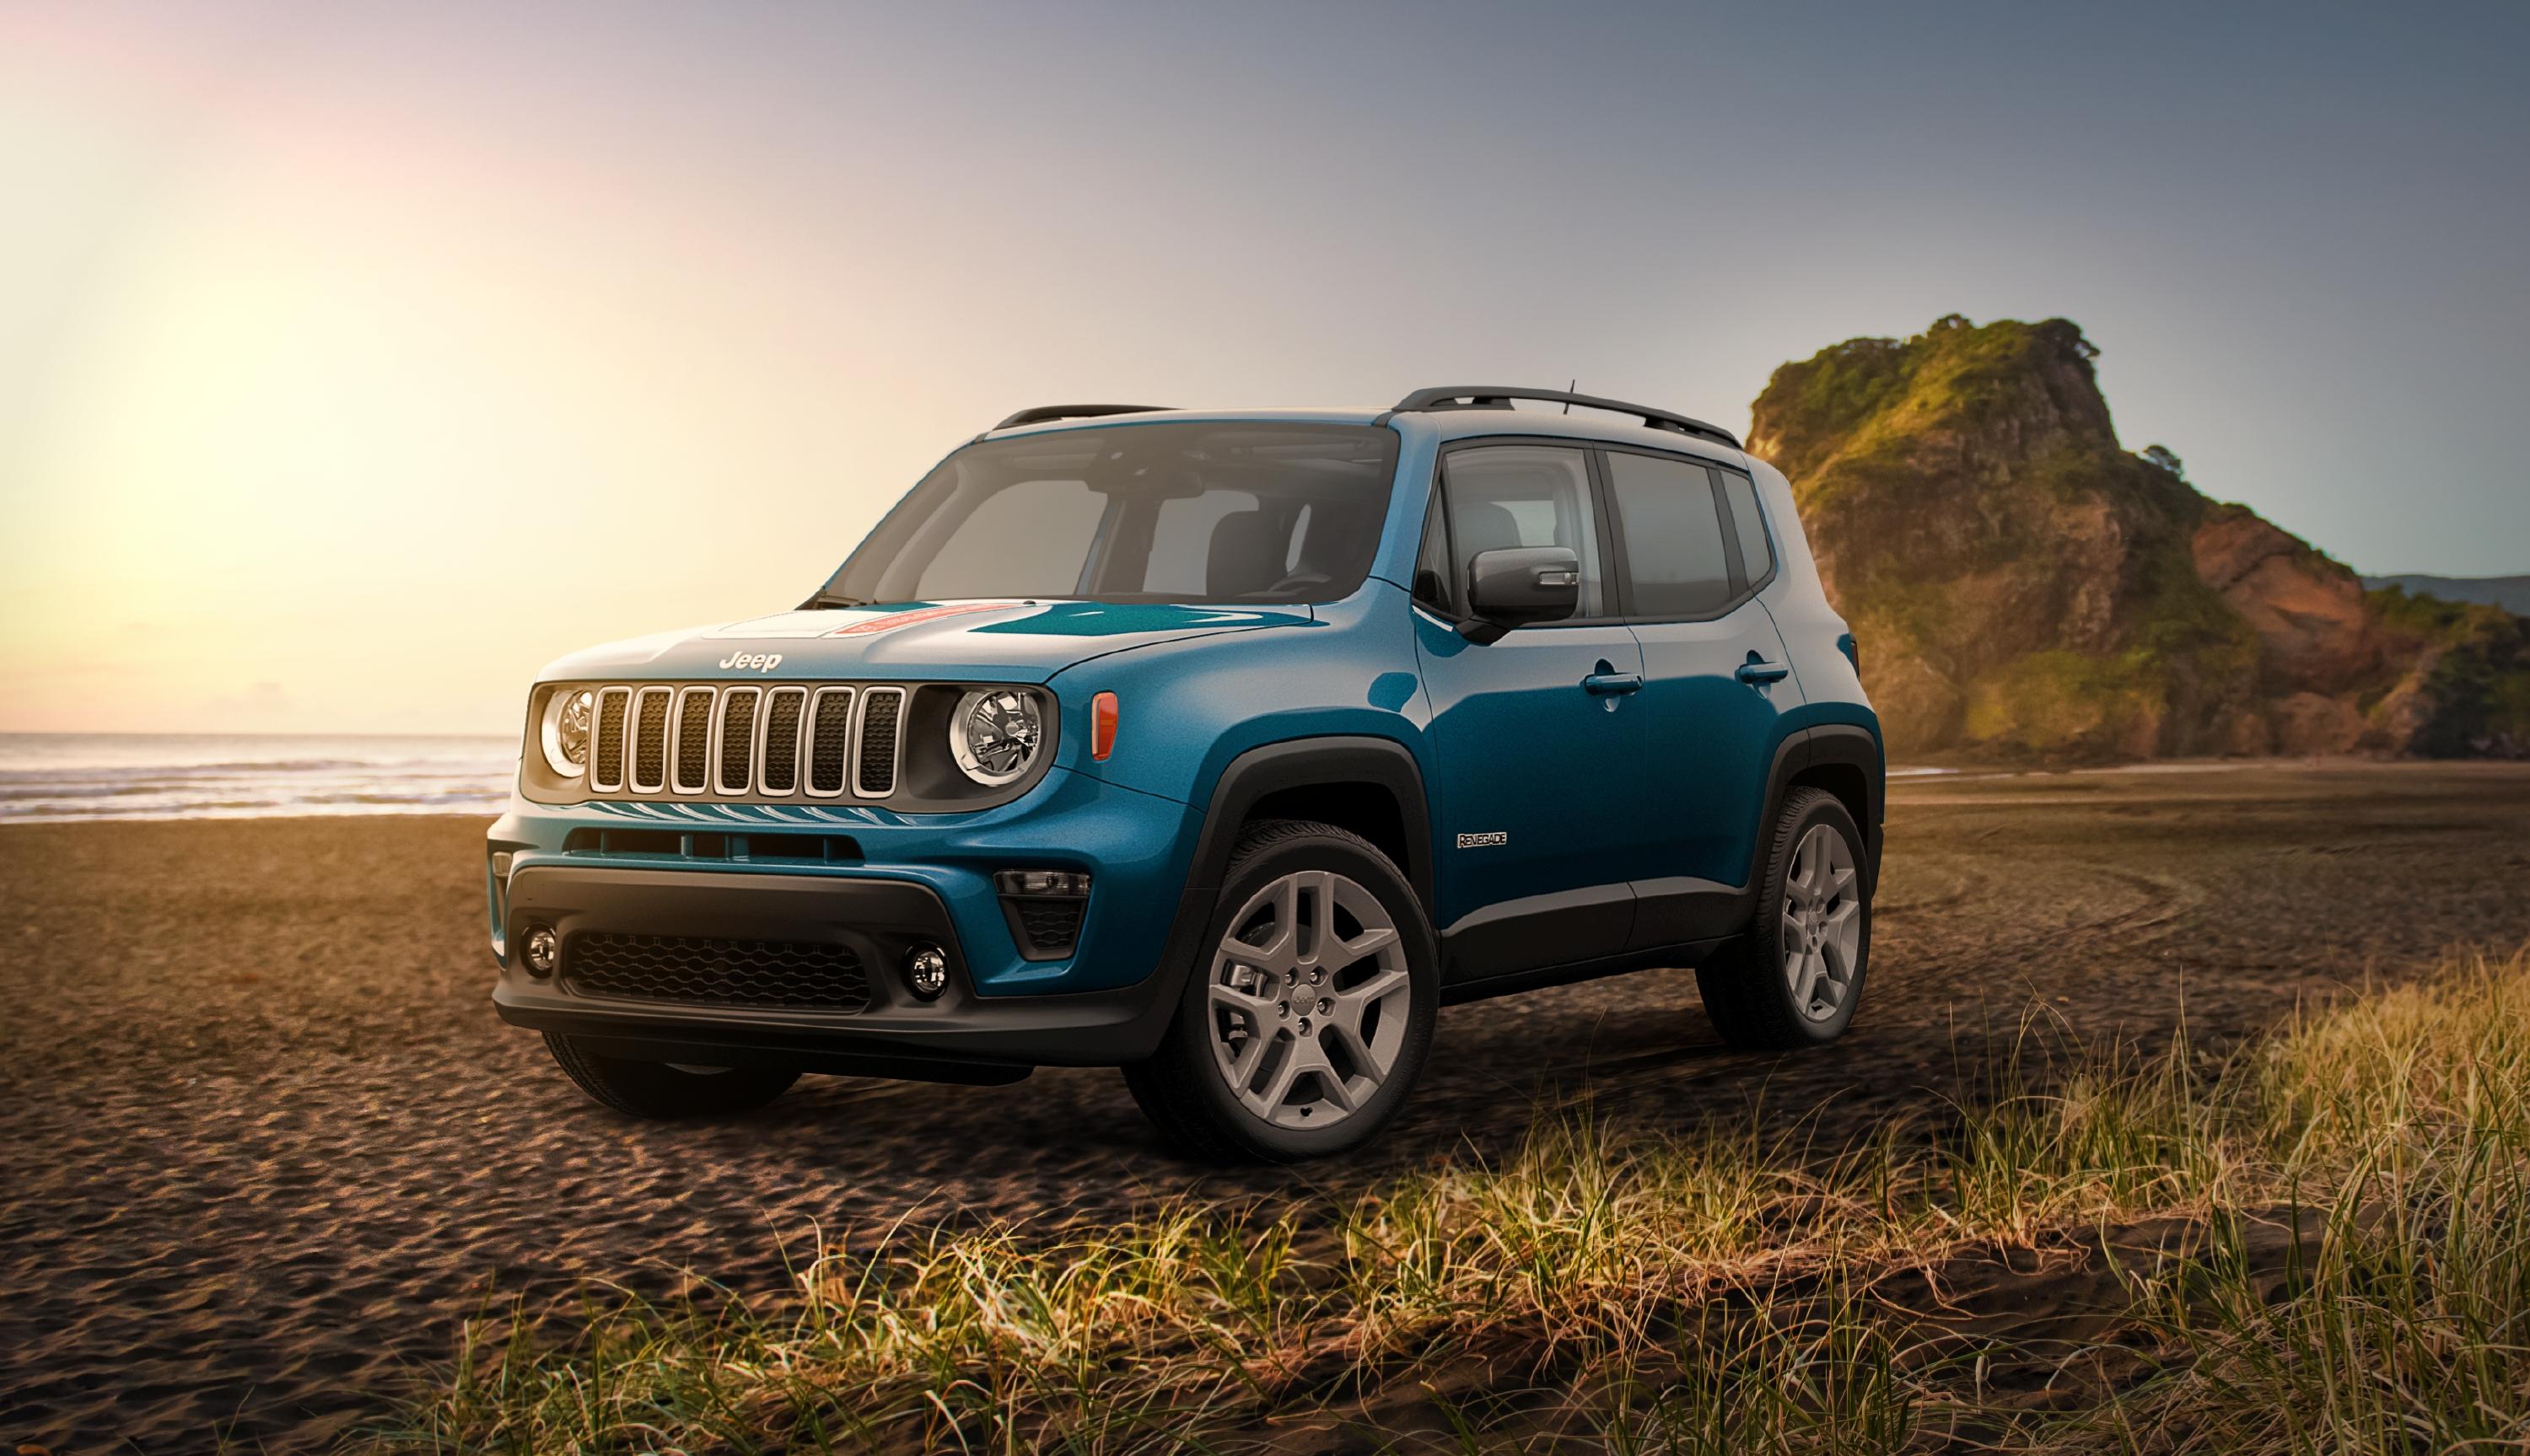 Image of a blue Jeep Renegade parked on the beach in the sand near the ocean.